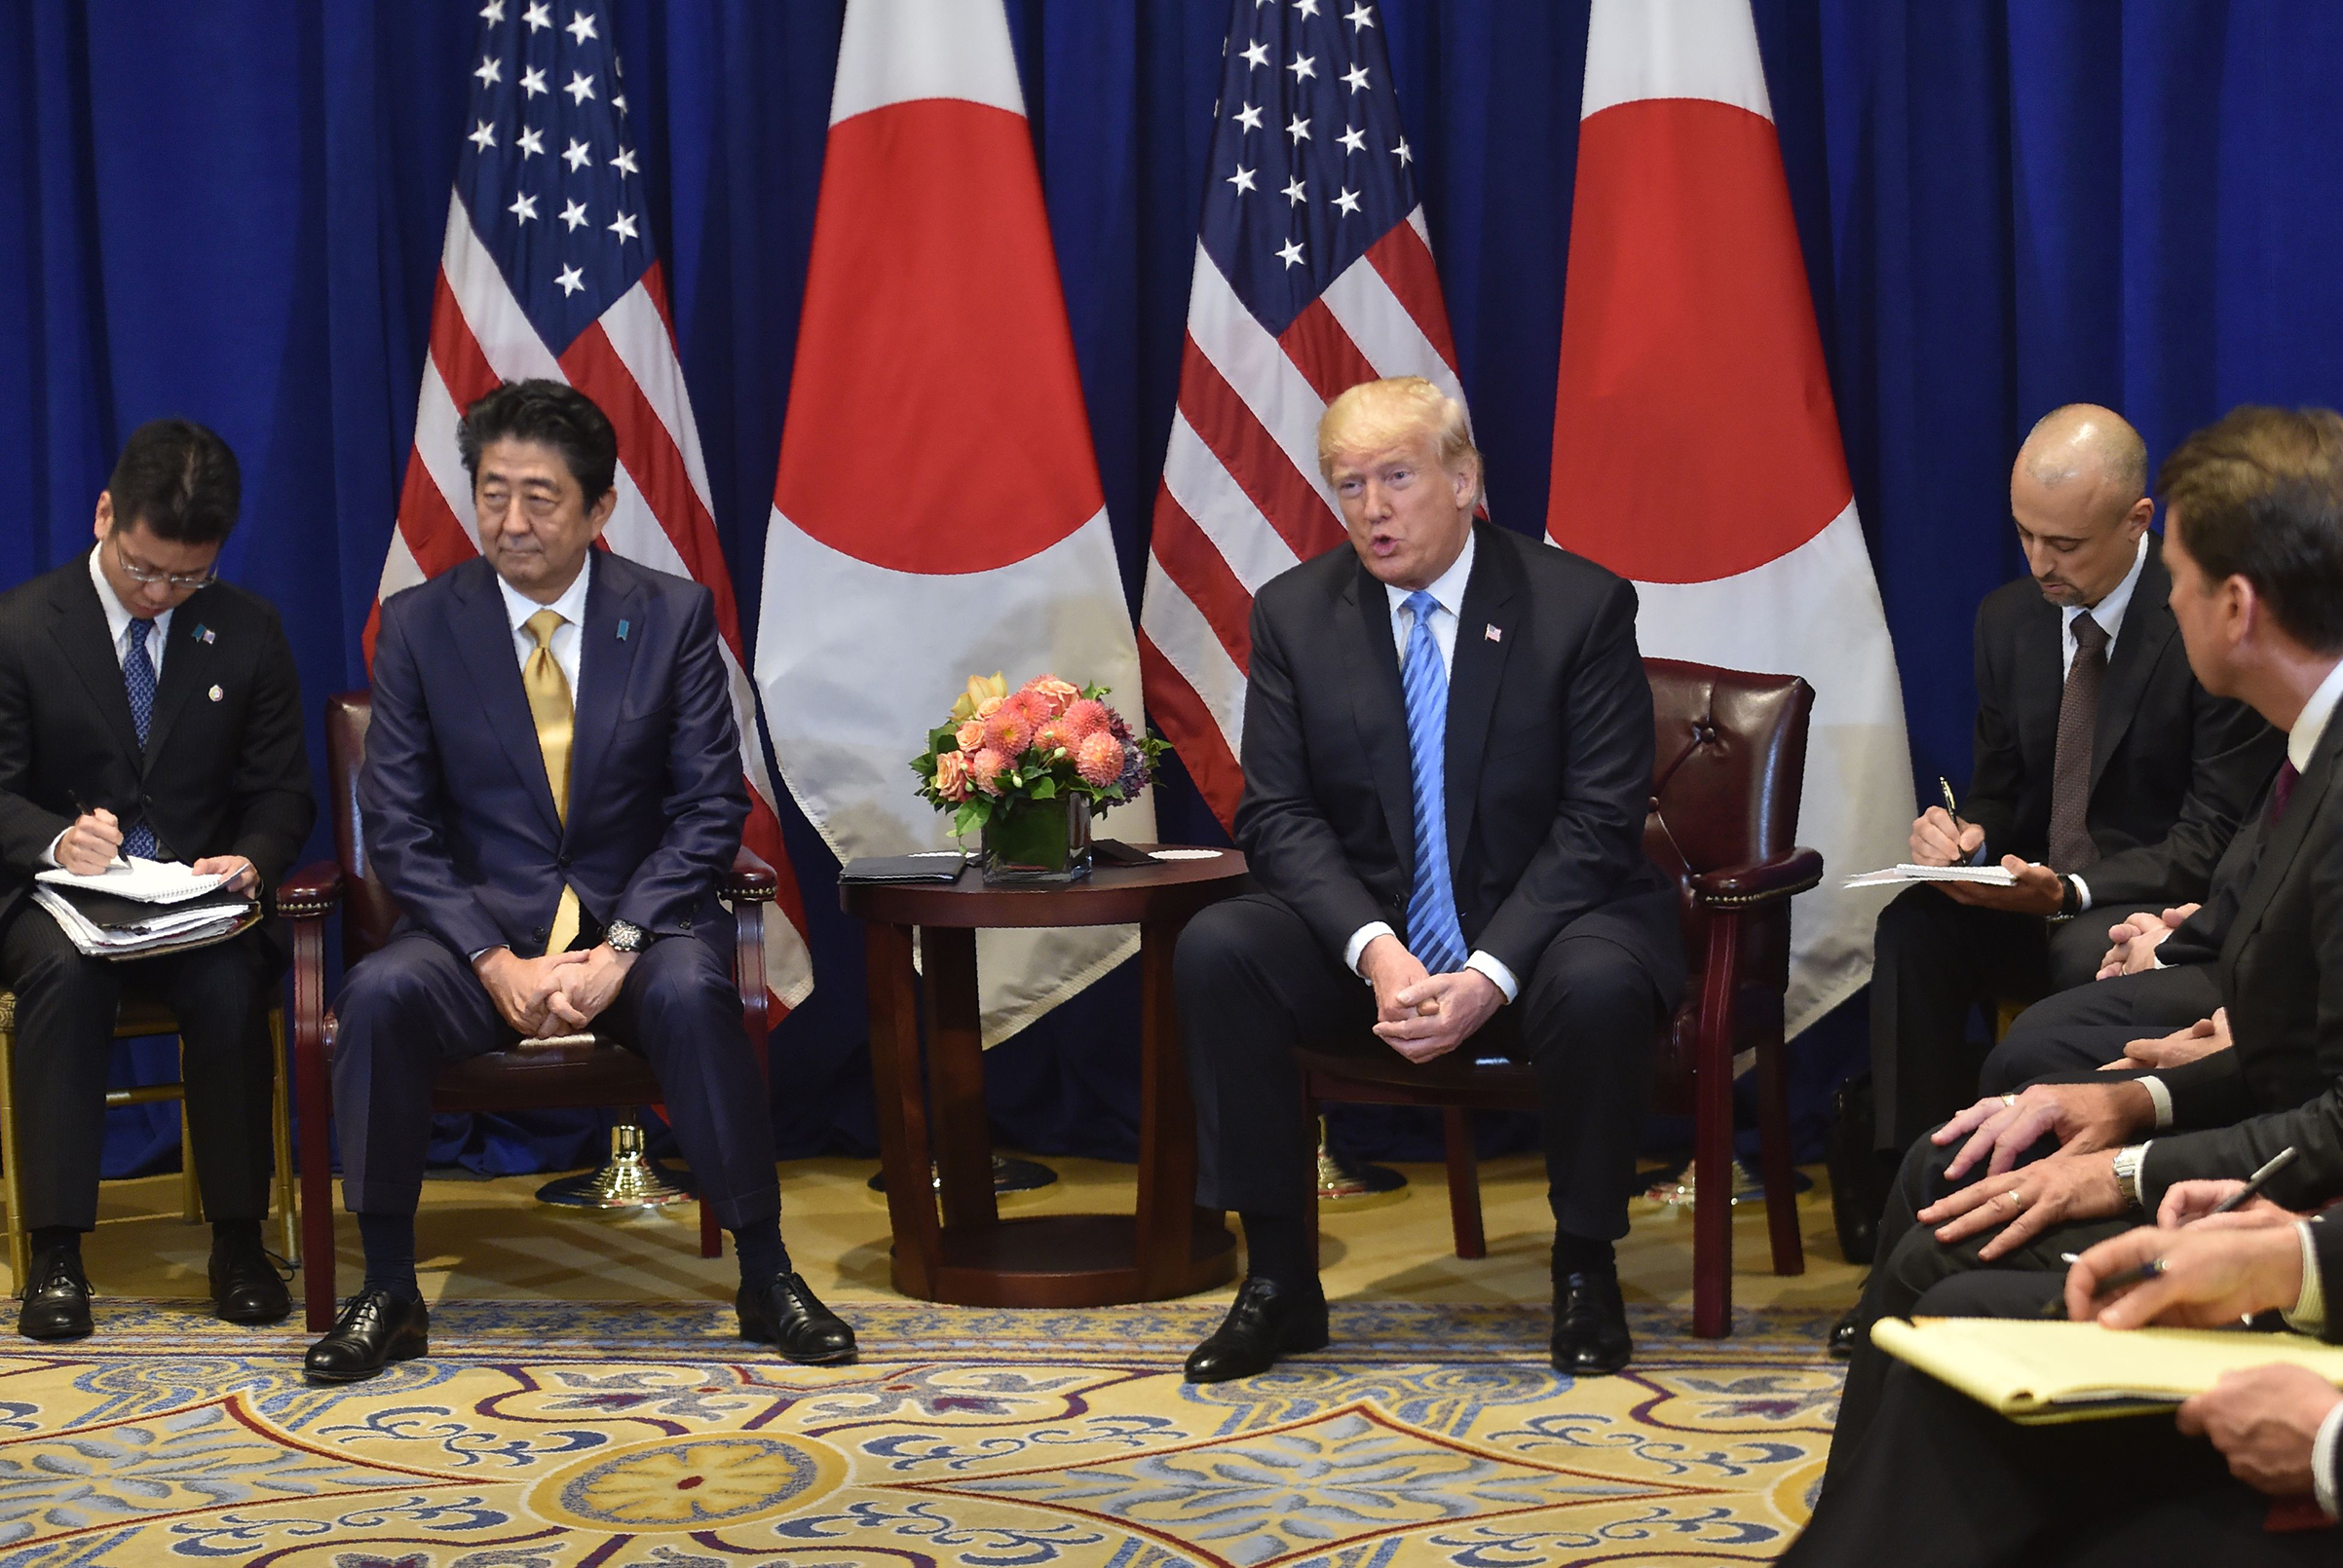 Japanese Prime Minister Shinzo Abe meets with US President Donald Trump, September 26, 2018 on the sidelines of the United Nations General Assembly (UNGA) in New York. (Nicholas Kamm—AFP/Getty Images)